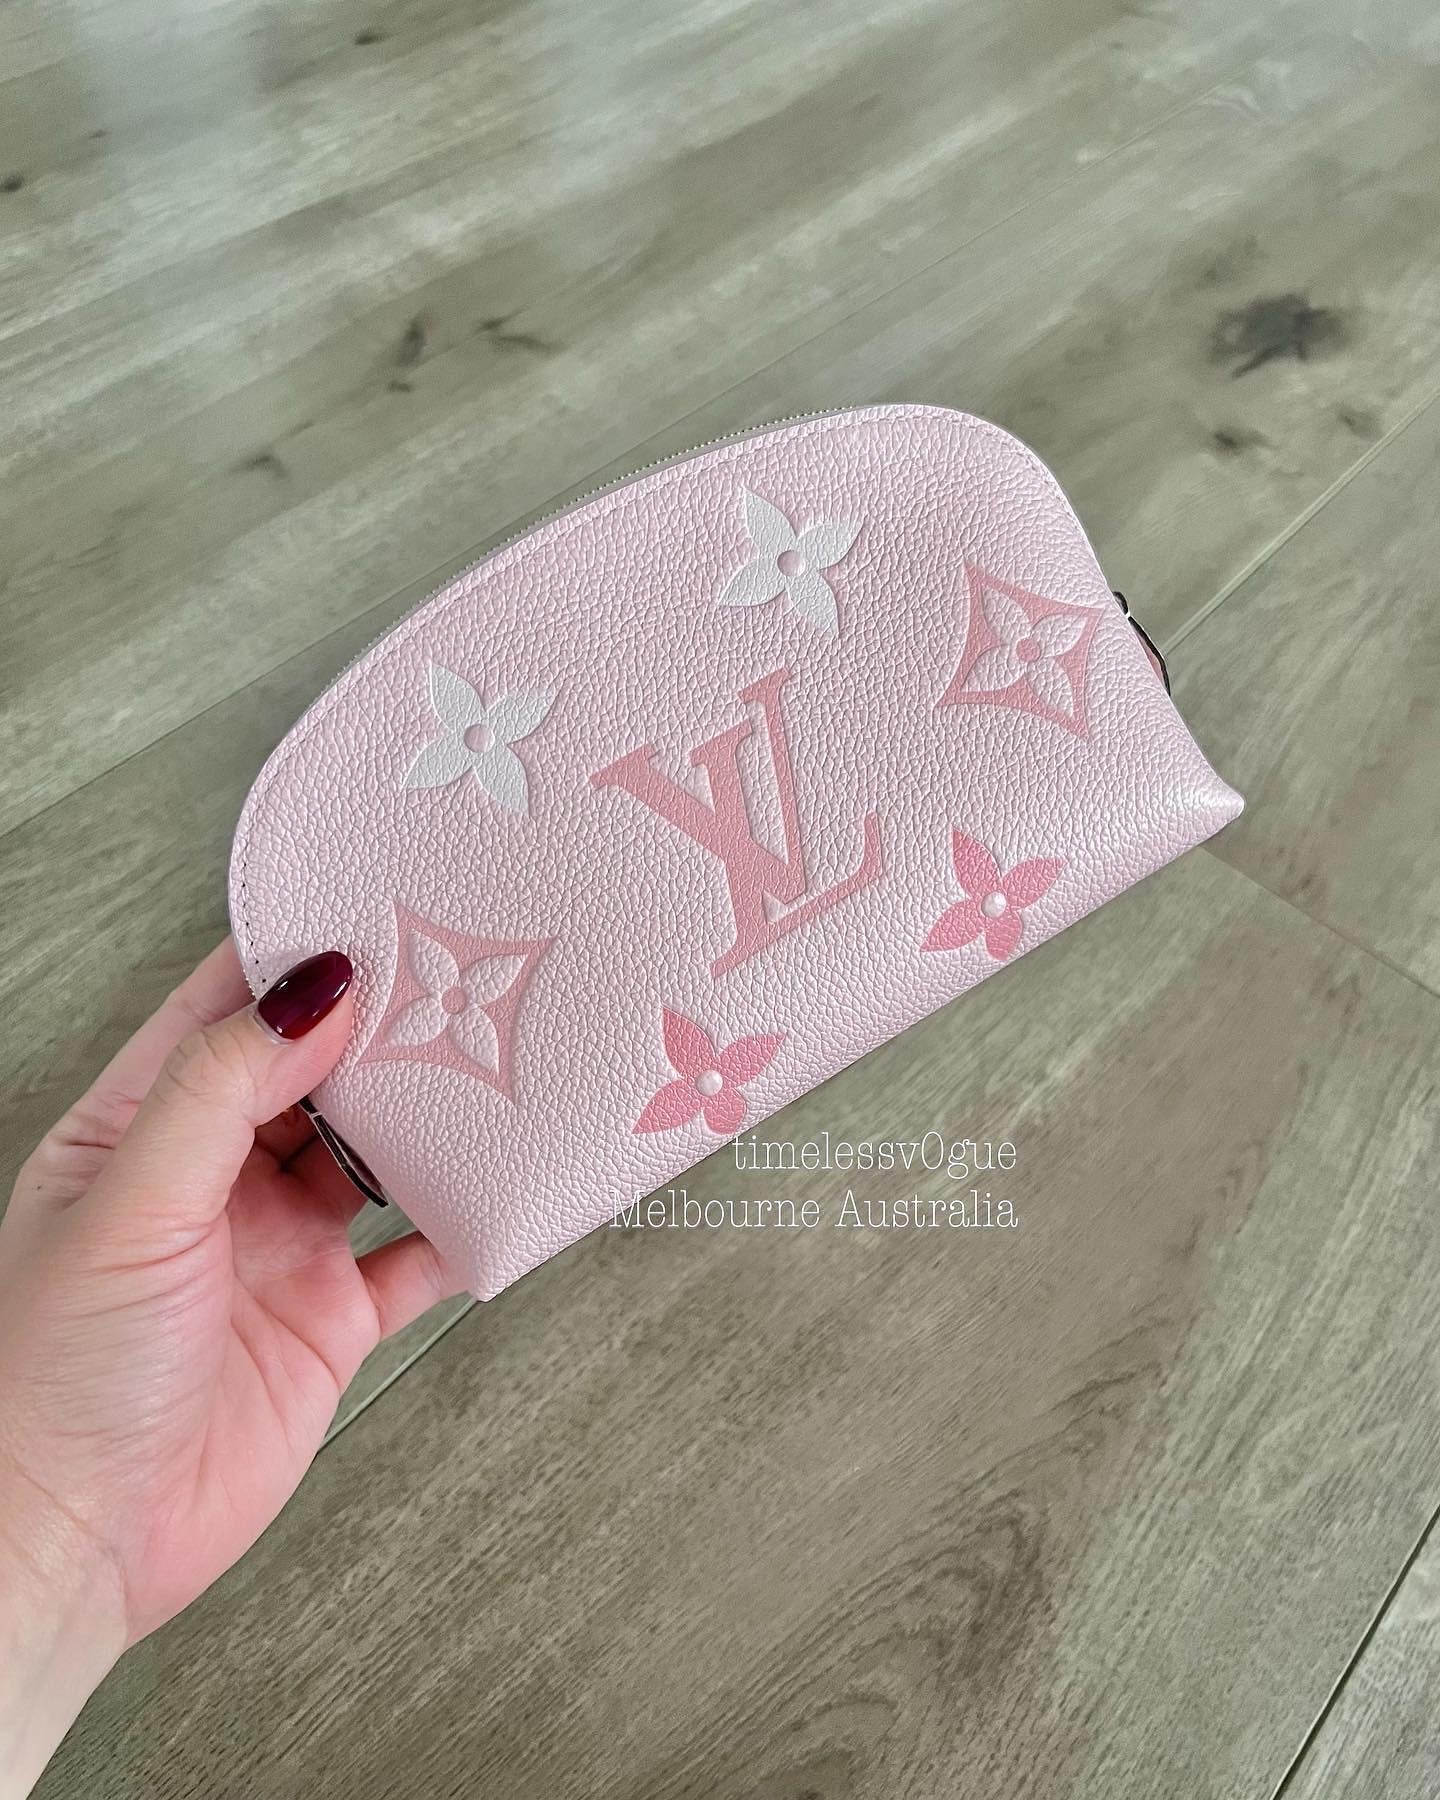 LV Clear Tote with cosmetic pouch